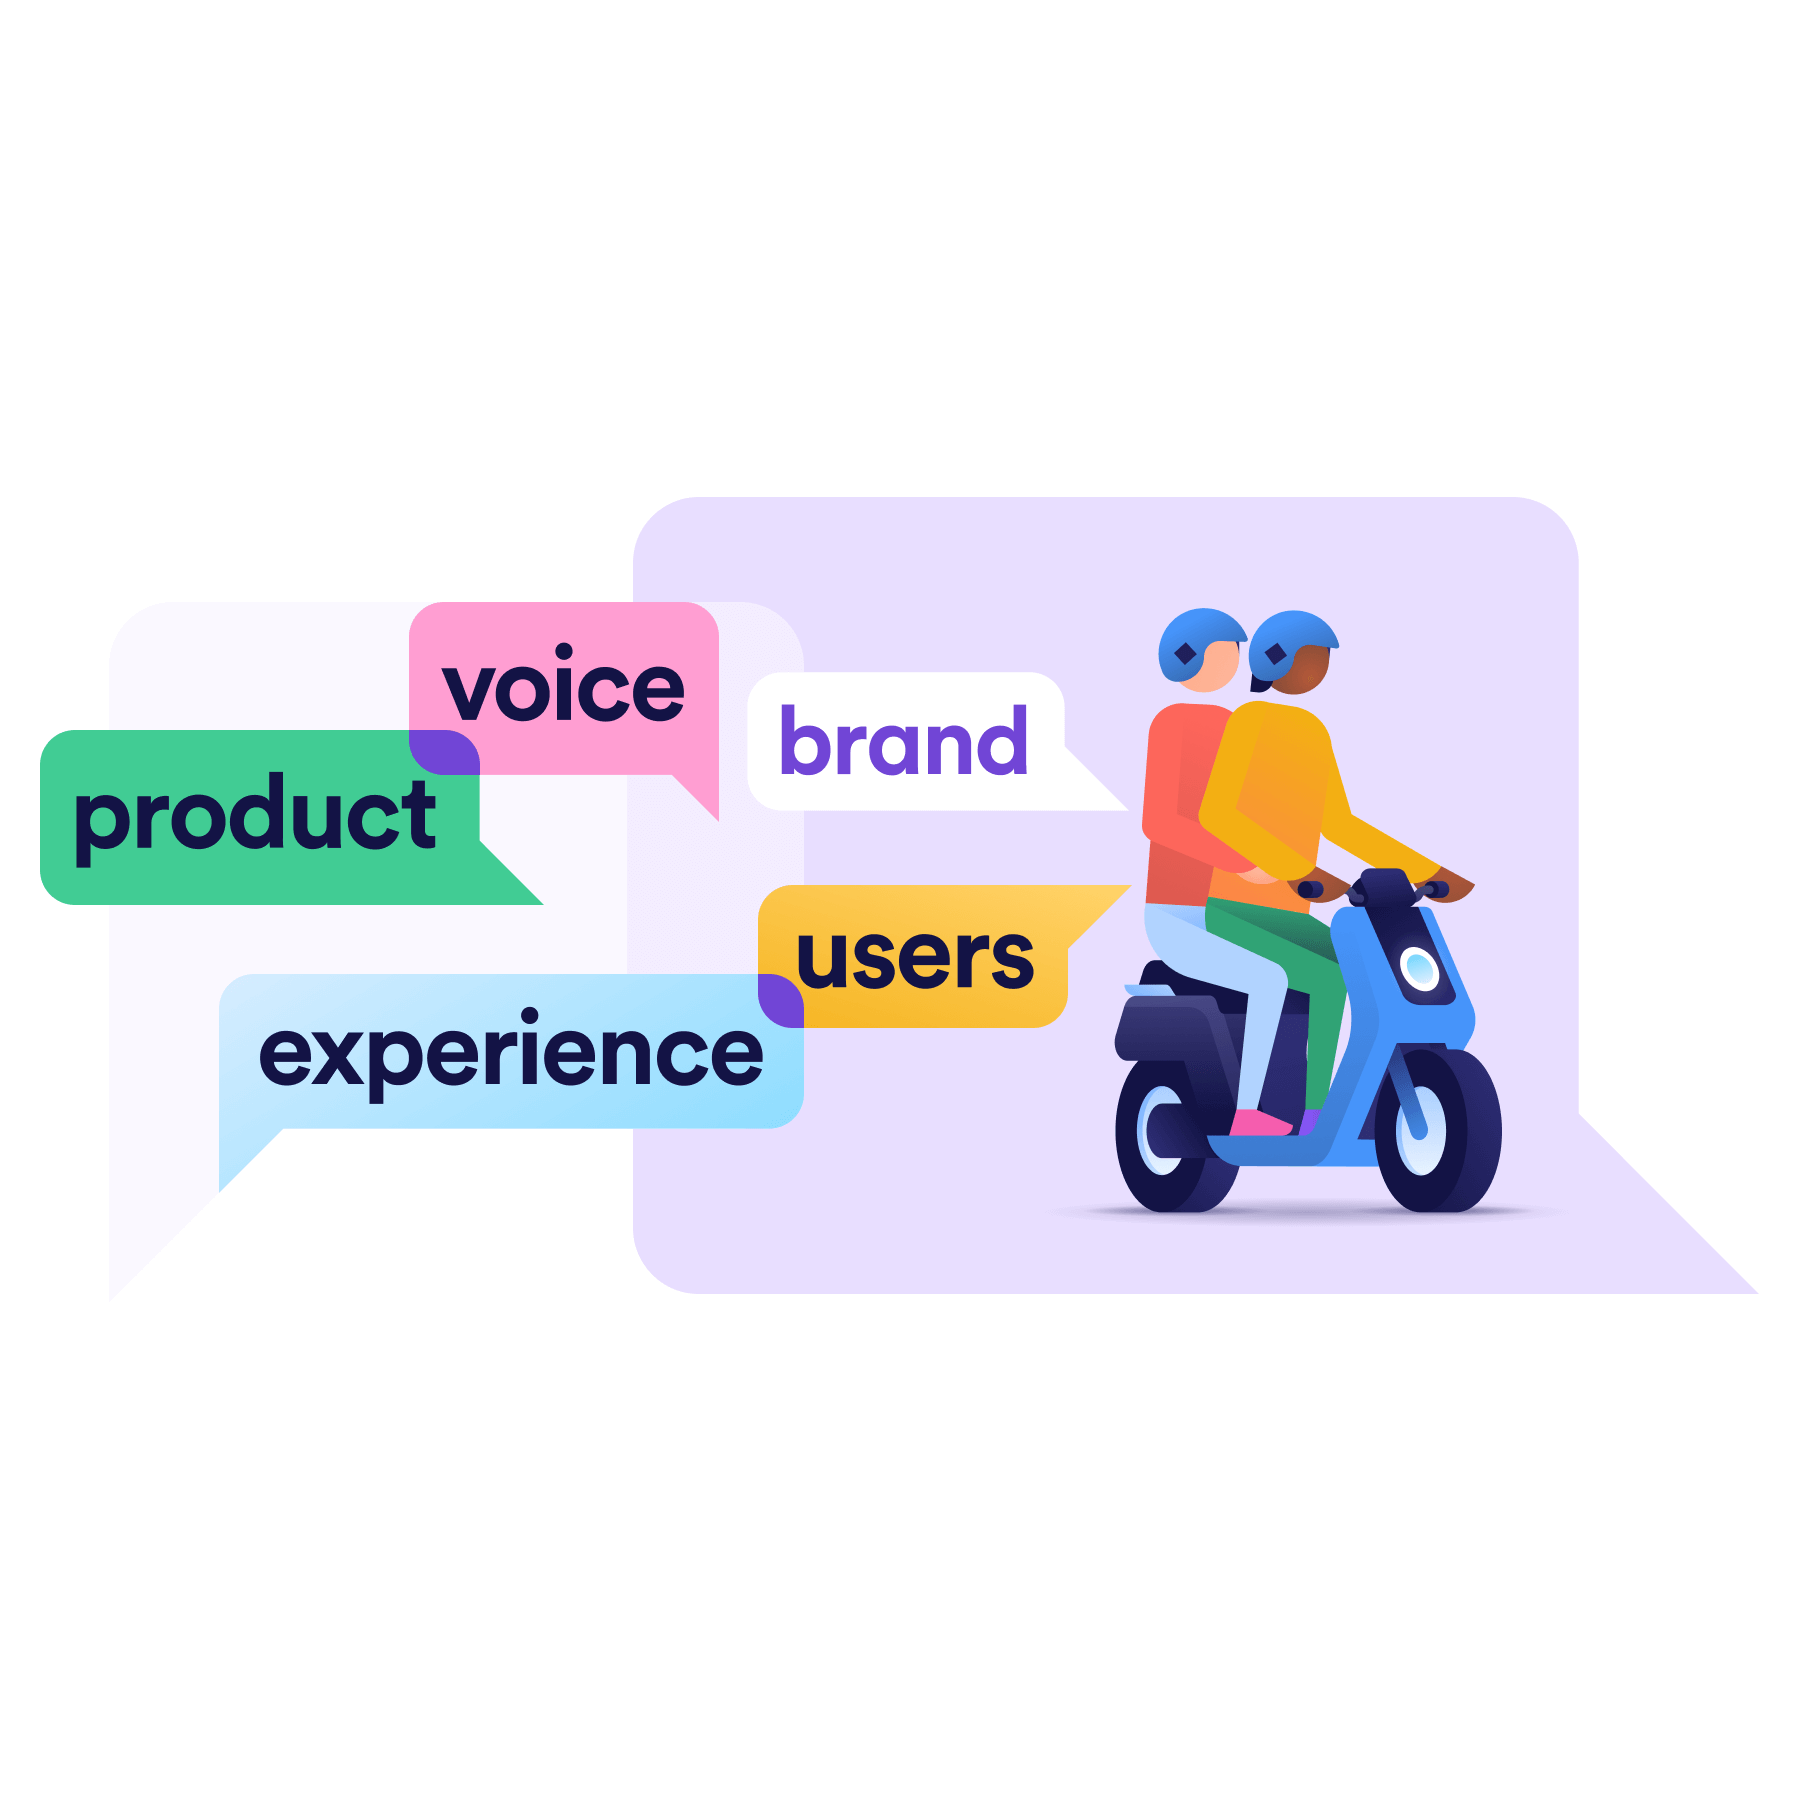 In the image there are two people on a motorcycle and five speech bubbles, one green, one pink, one white, one yellow and one blue. In each of them there is a word: product, voice, brand, experience and users.